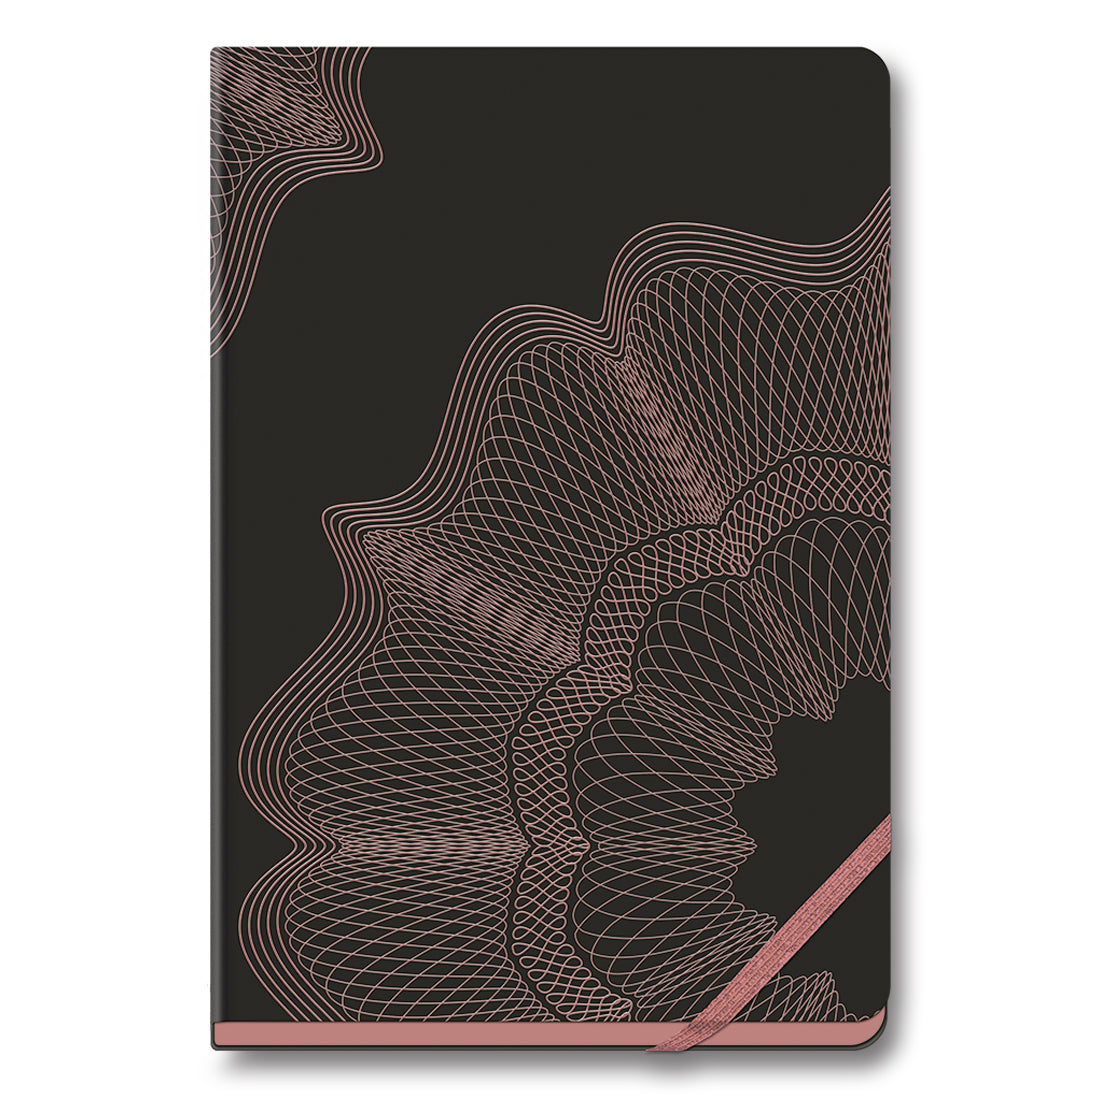 Navneet HQ | Hard Cover Gold Rush Notebook - Black for Office Use and Gifting | Single Line | A5 Size - 21 cm x 14.8 cm | 192 Pages | Pack of 1